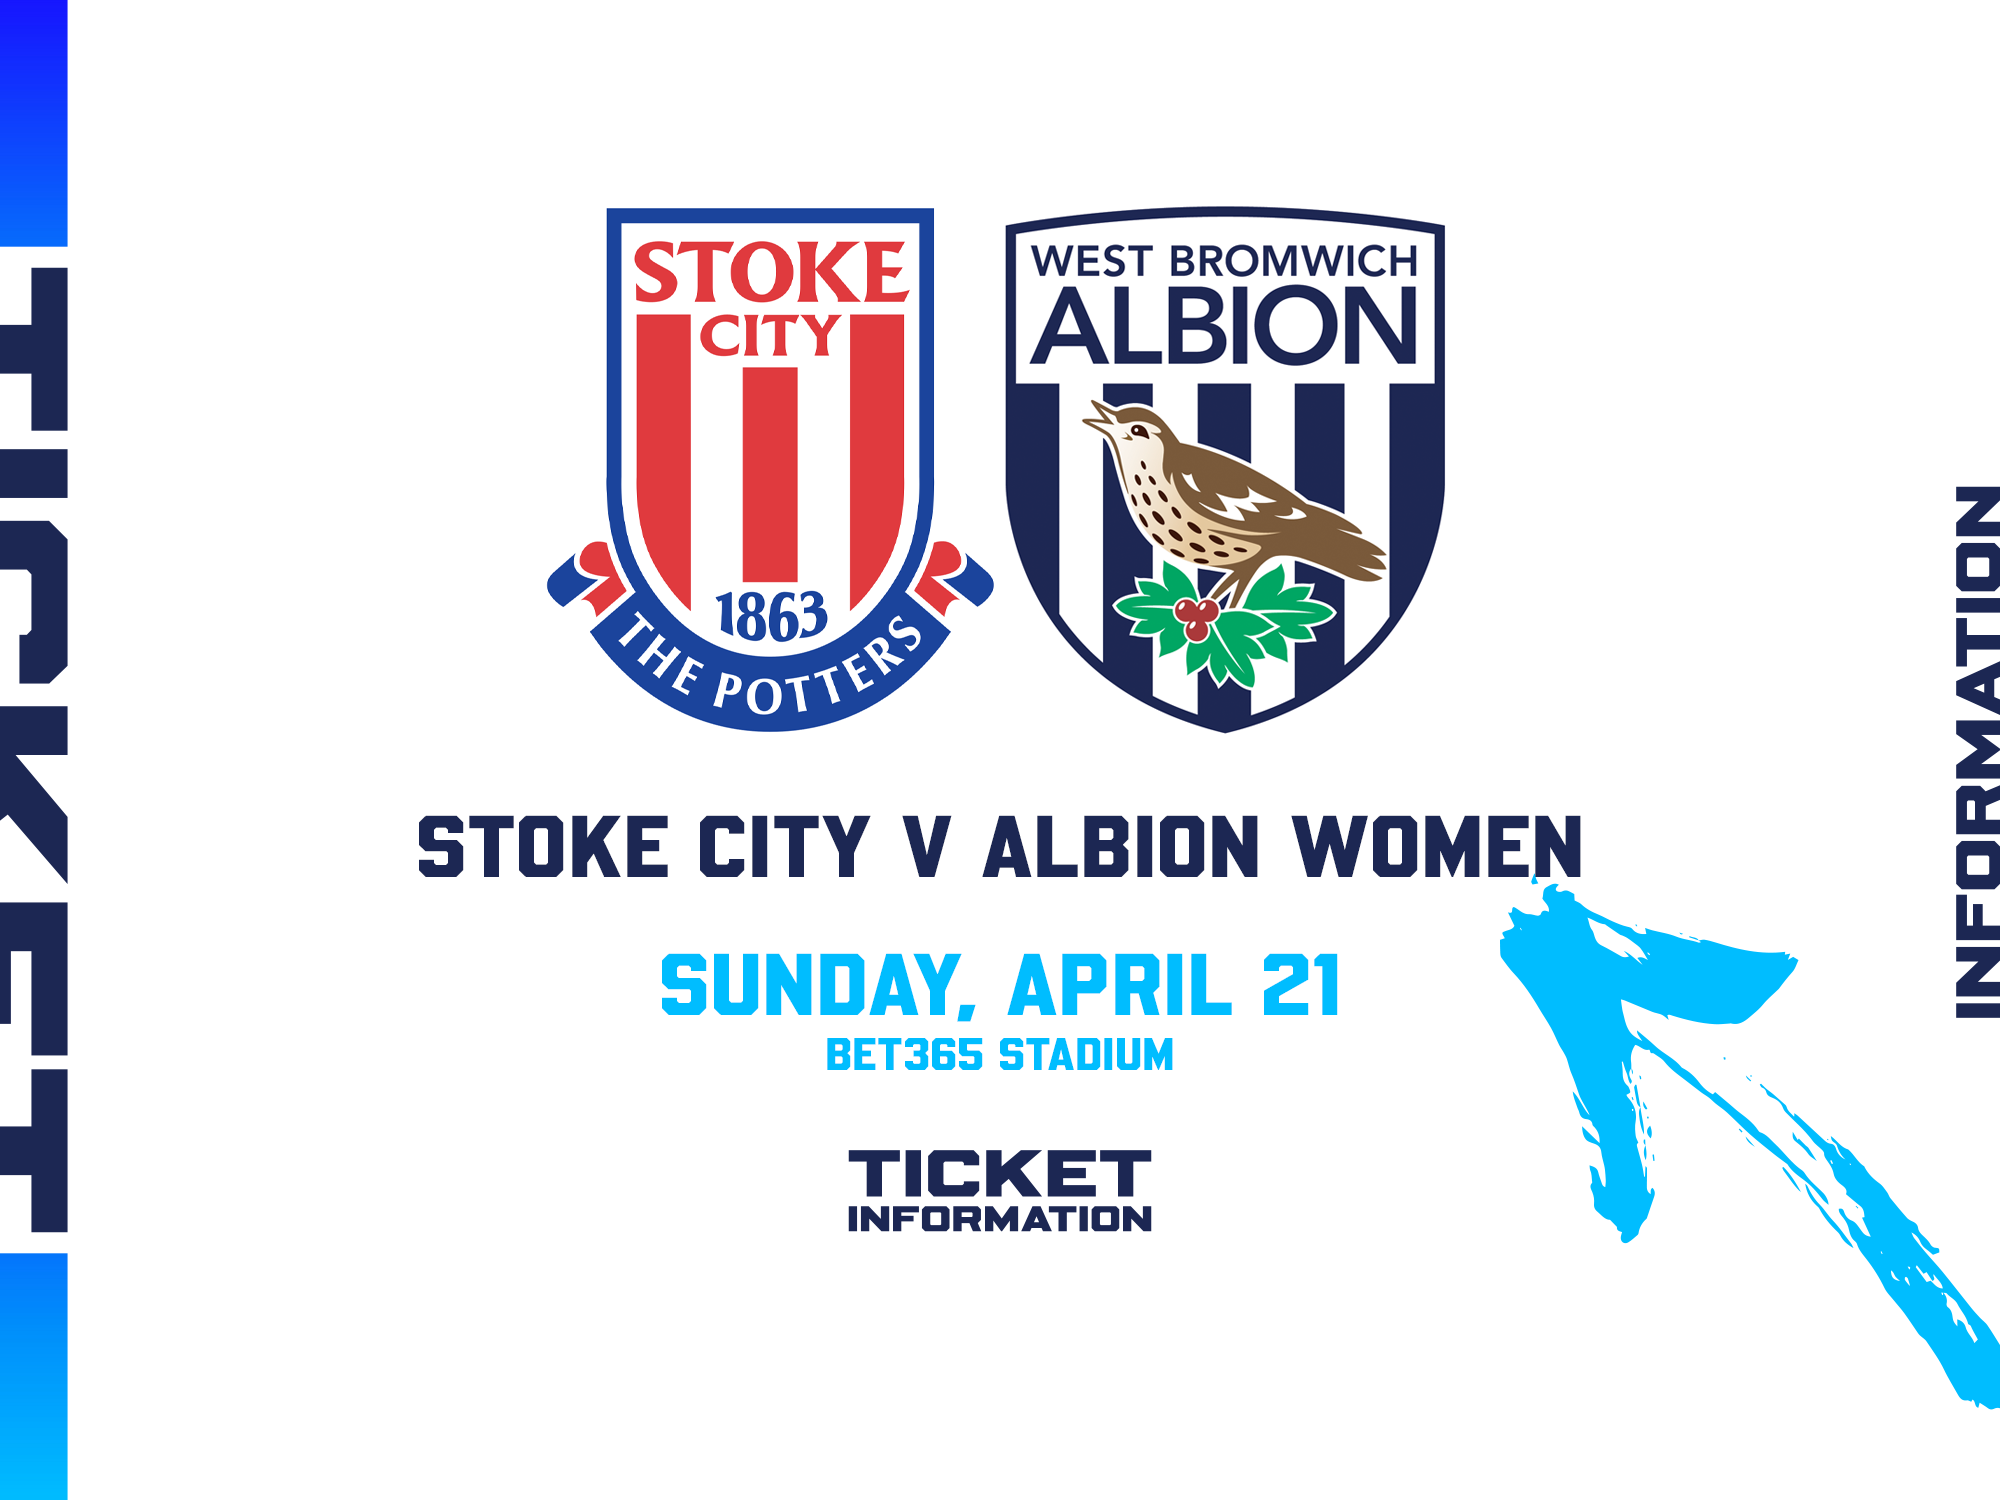 A ticket graphic displaying information for Albion Women's game against Stoke